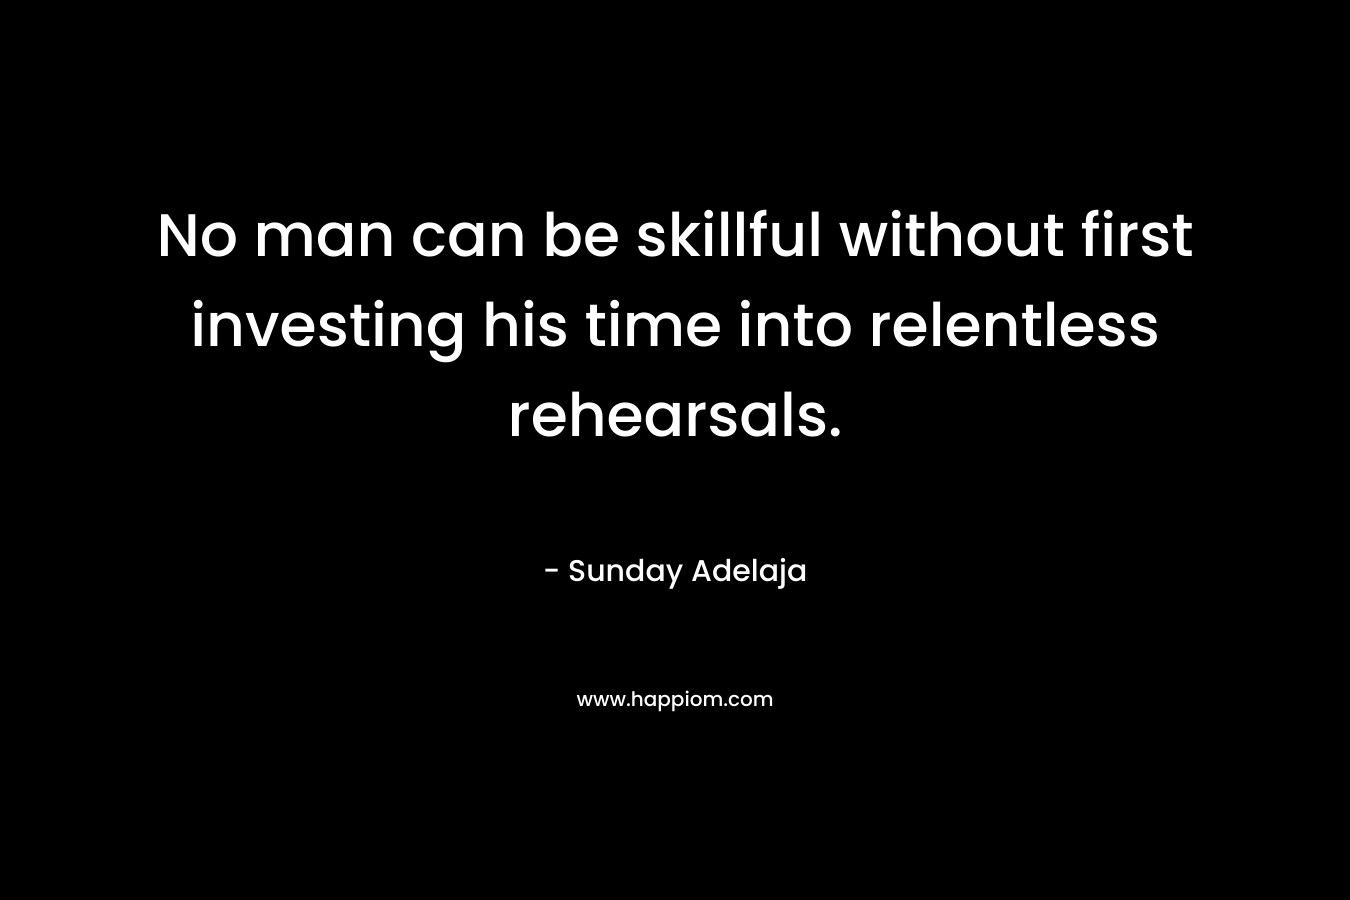 No man can be skillful without first investing his time into relentless rehearsals. – Sunday Adelaja